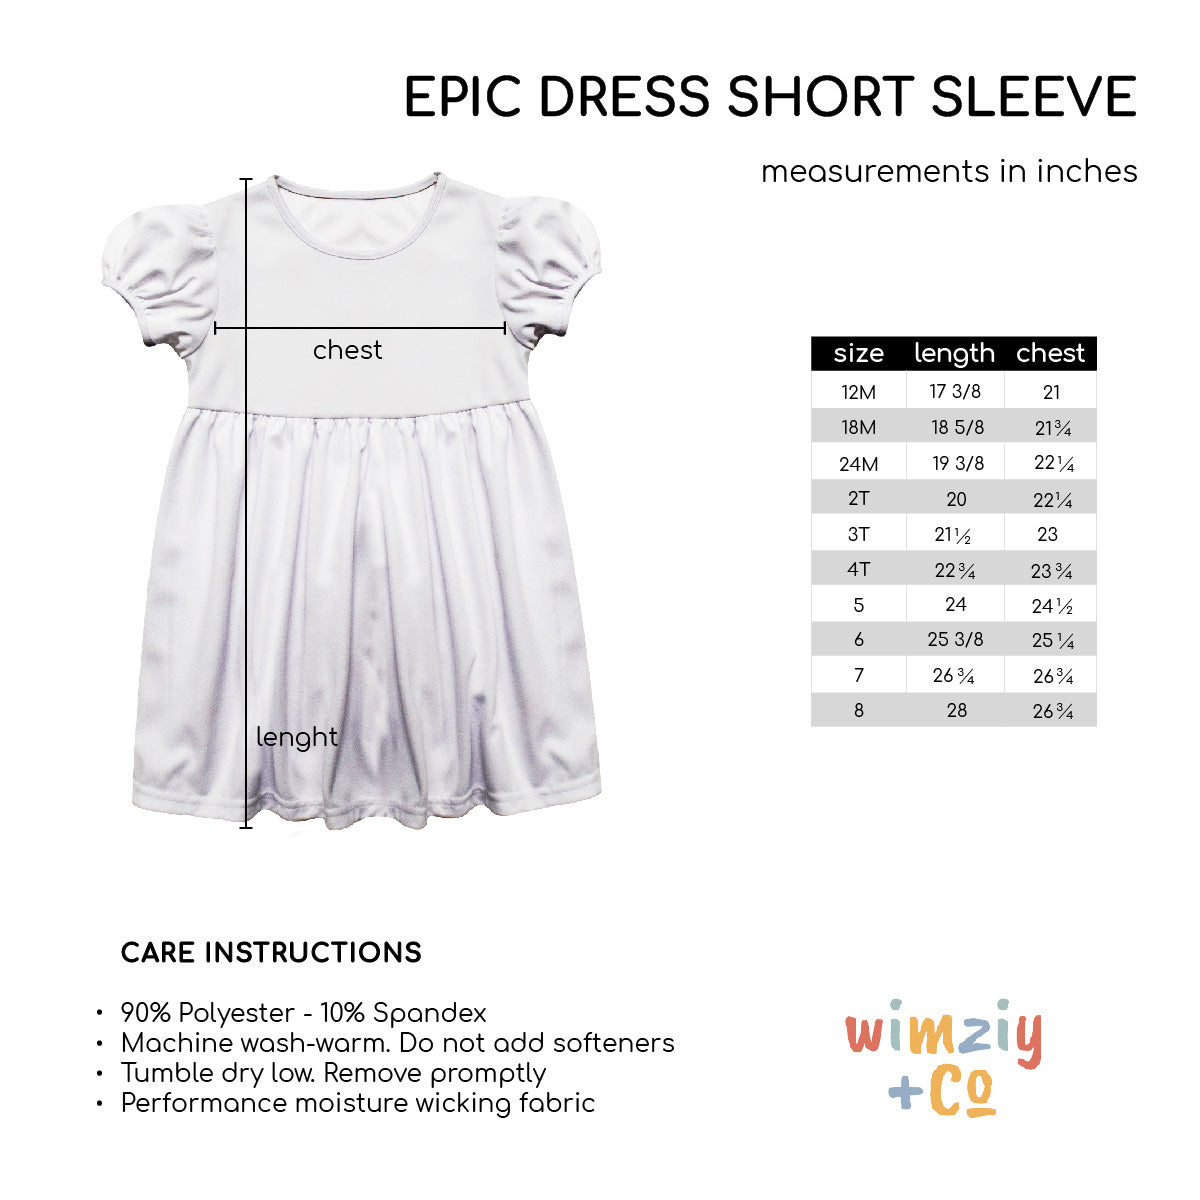 Princess White and Pink Short Sleeve Epic Dress - Wimziy&Co.